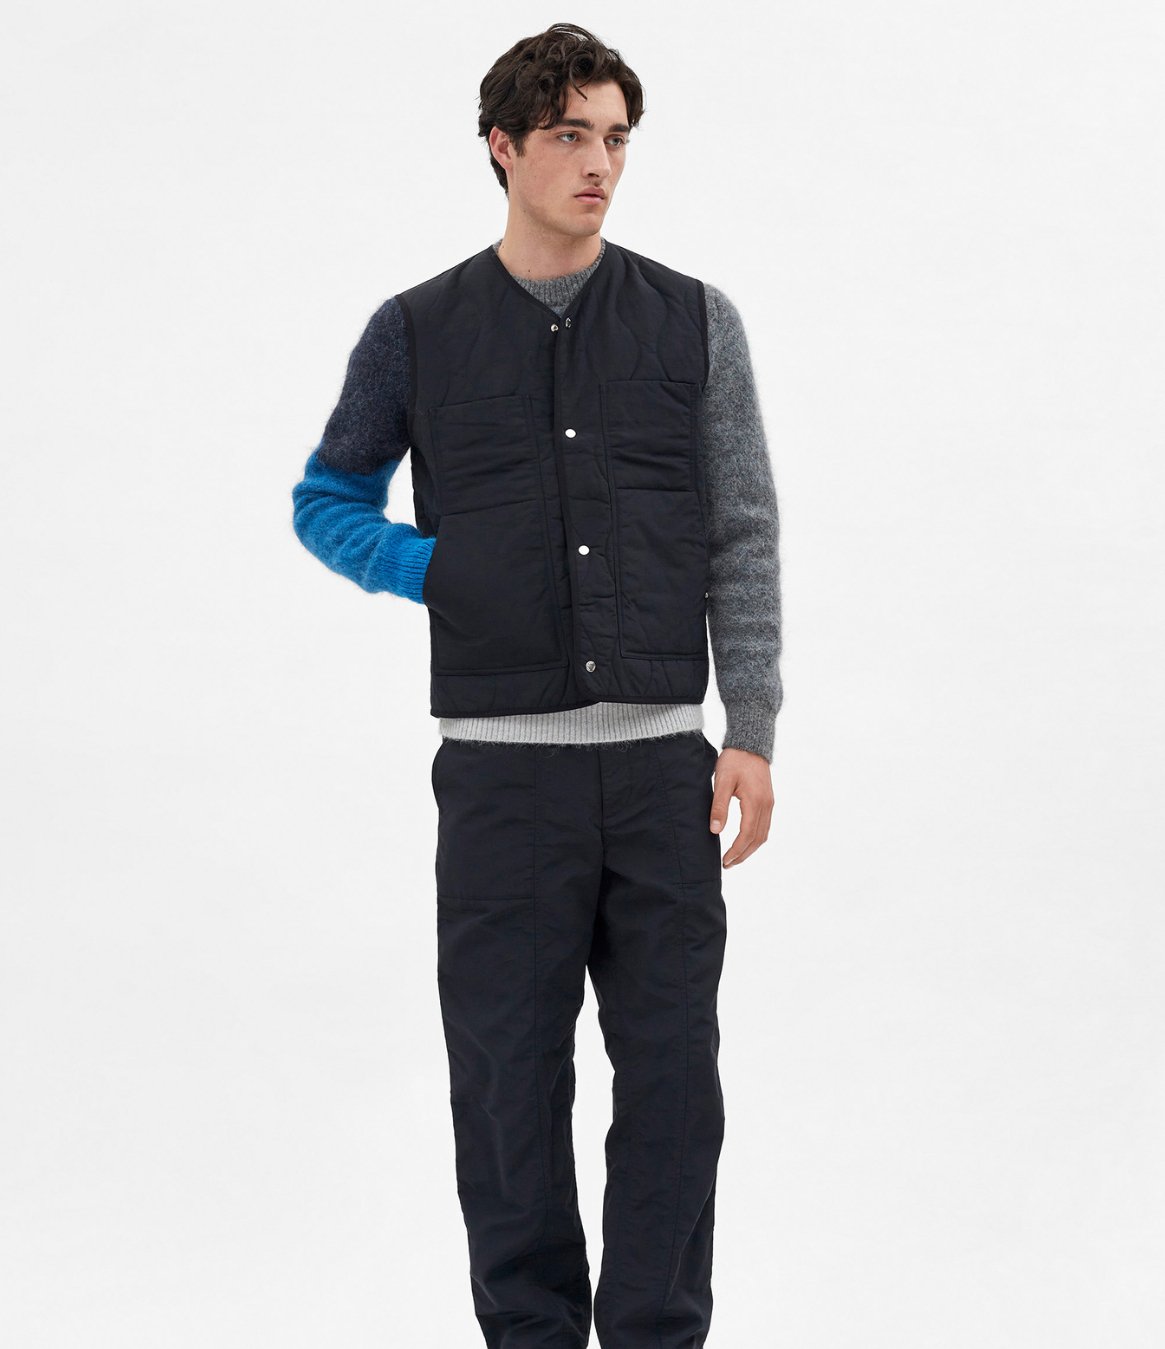 Peter Waxed Nylon Insulated Vest - Norse Projects - Danali - N50-0226-Black-S